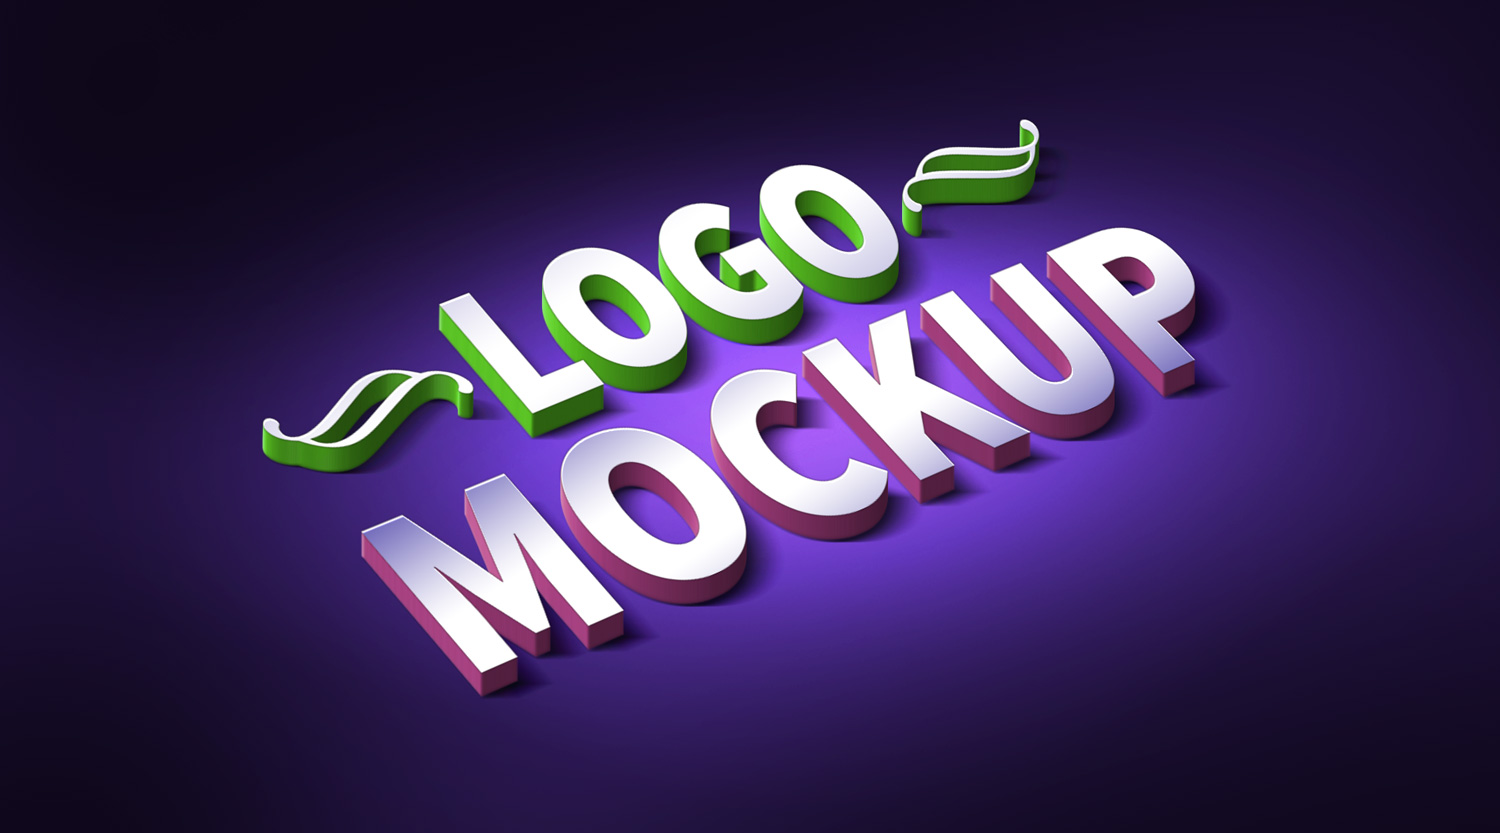 Download 3D Logo & Text Effect Mockup (PSD) - GraphicsFuel